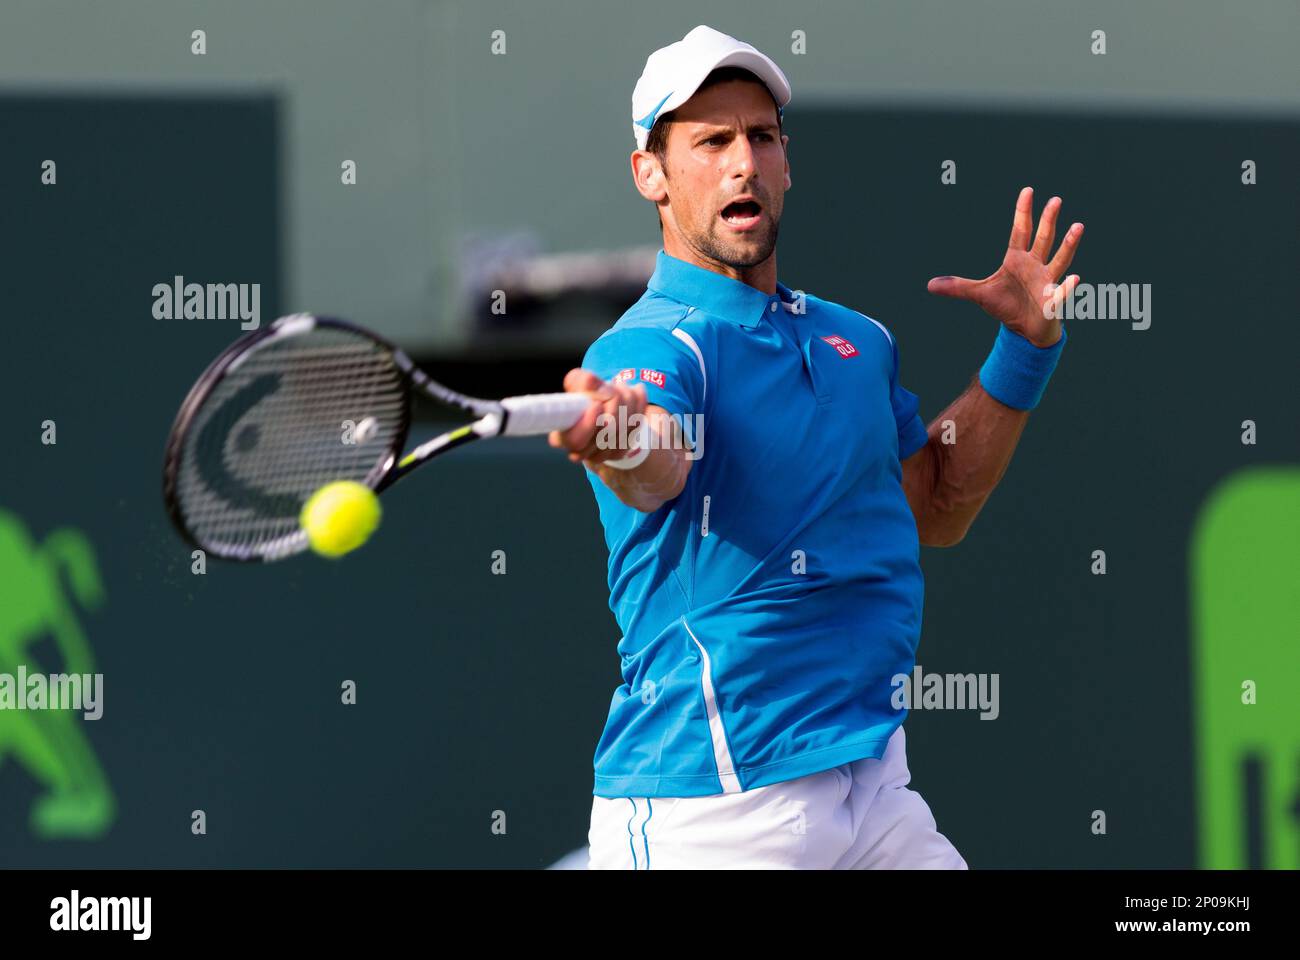 March 27, 2016: Novak Djokovic, of Serbia, in action against Joao Sousa, of  Portugal, during Day 7 at the Miami Open presented by Itau international  tennis tournament at Crandon Park Tennis Center